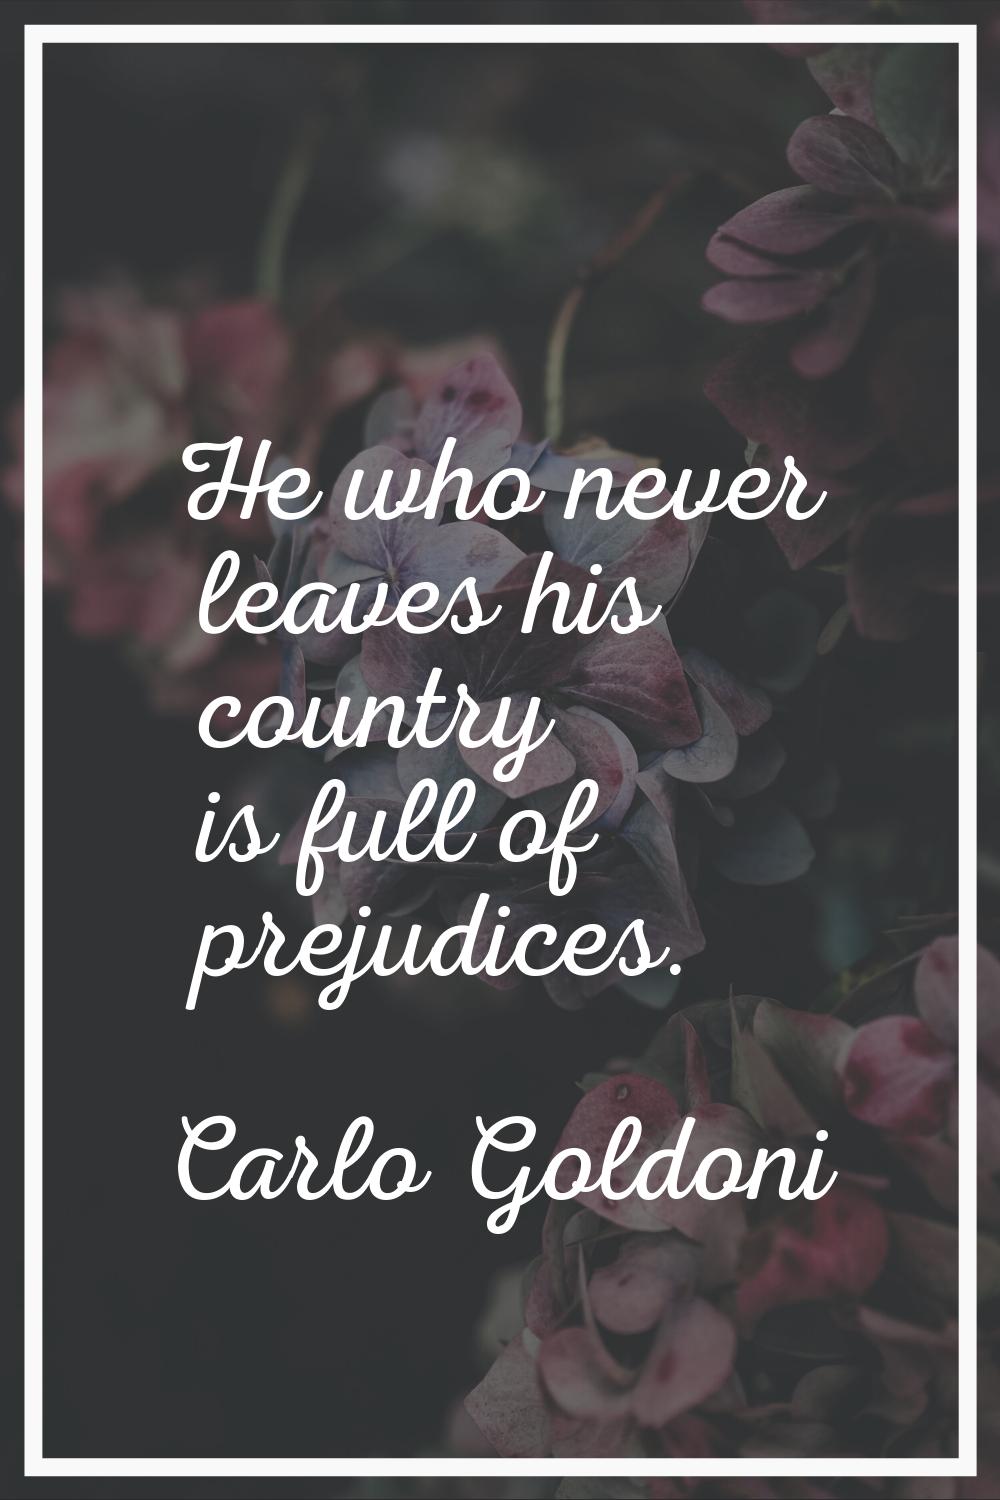 He who never leaves his country is full of prejudices.